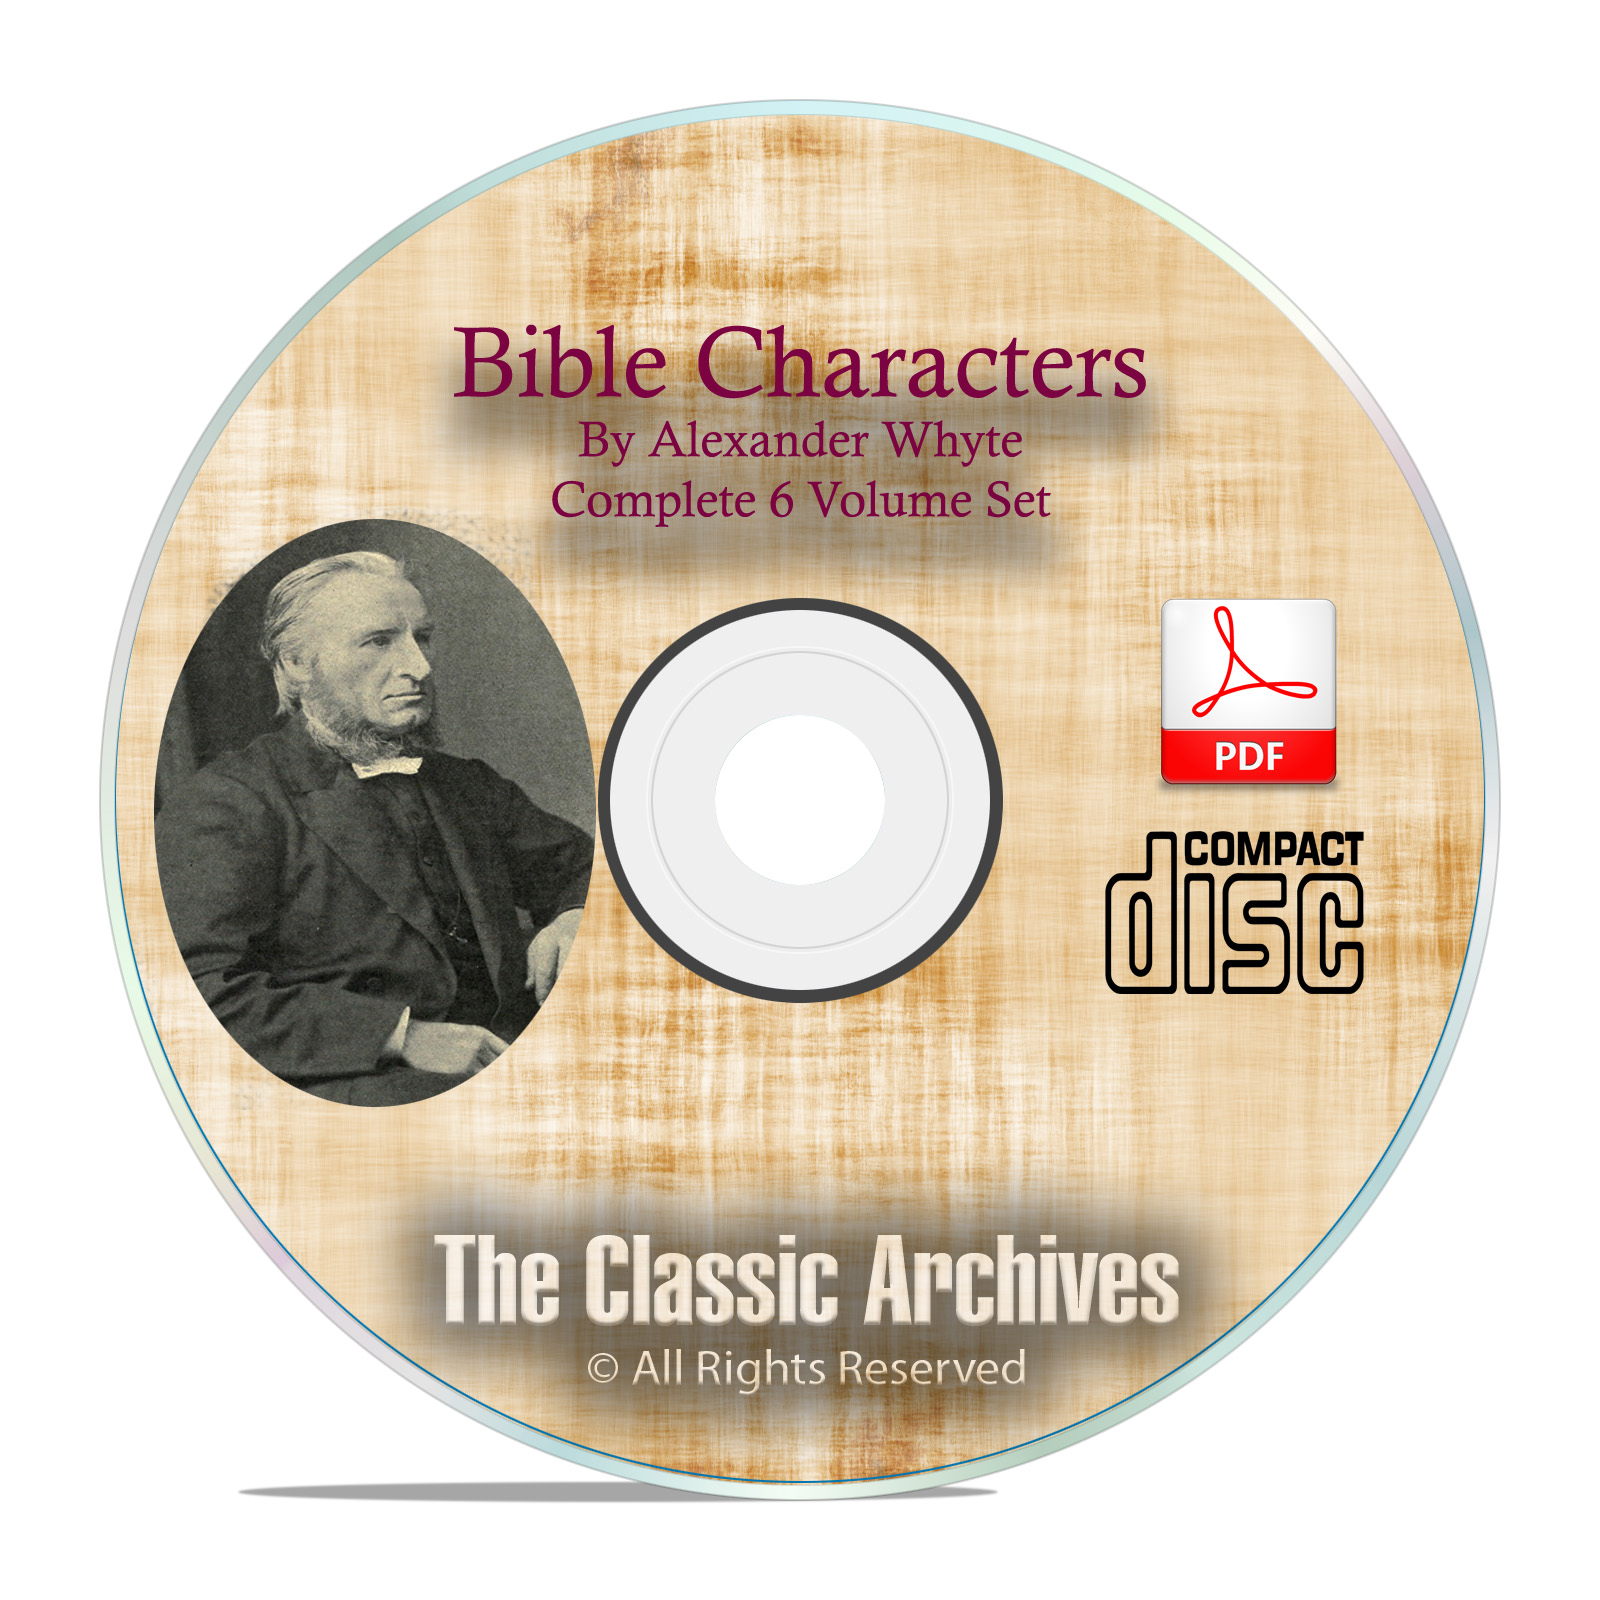 BIBLE CHARACTERS, by Alexander Whyte, Scripture Commentary, Full Set on CD